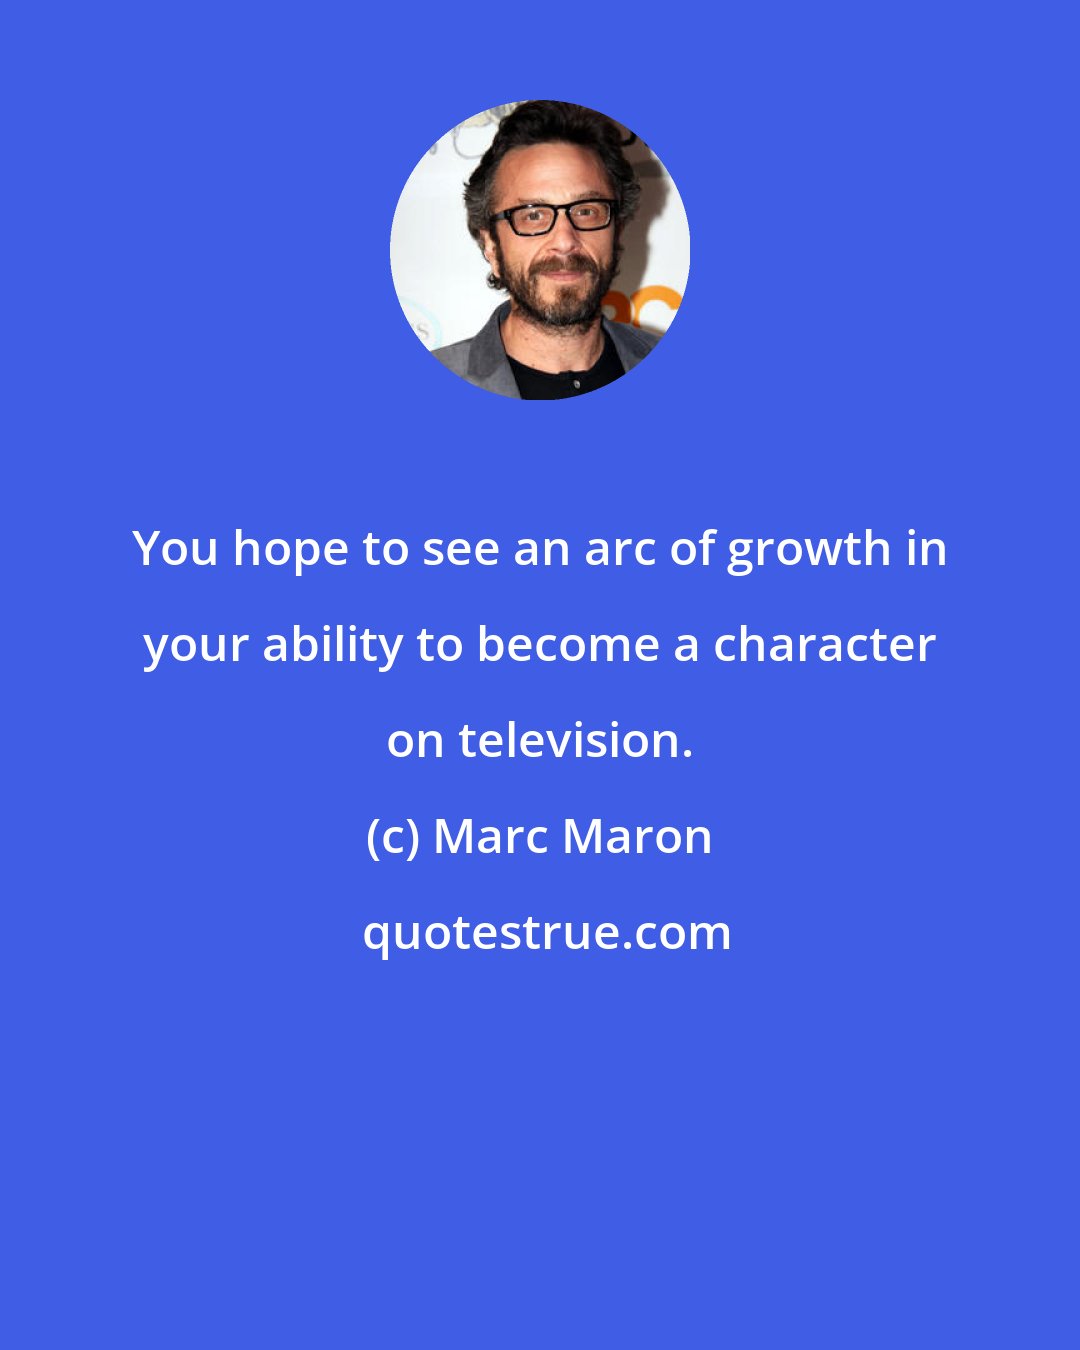 Marc Maron: You hope to see an arc of growth in your ability to become a character on television.